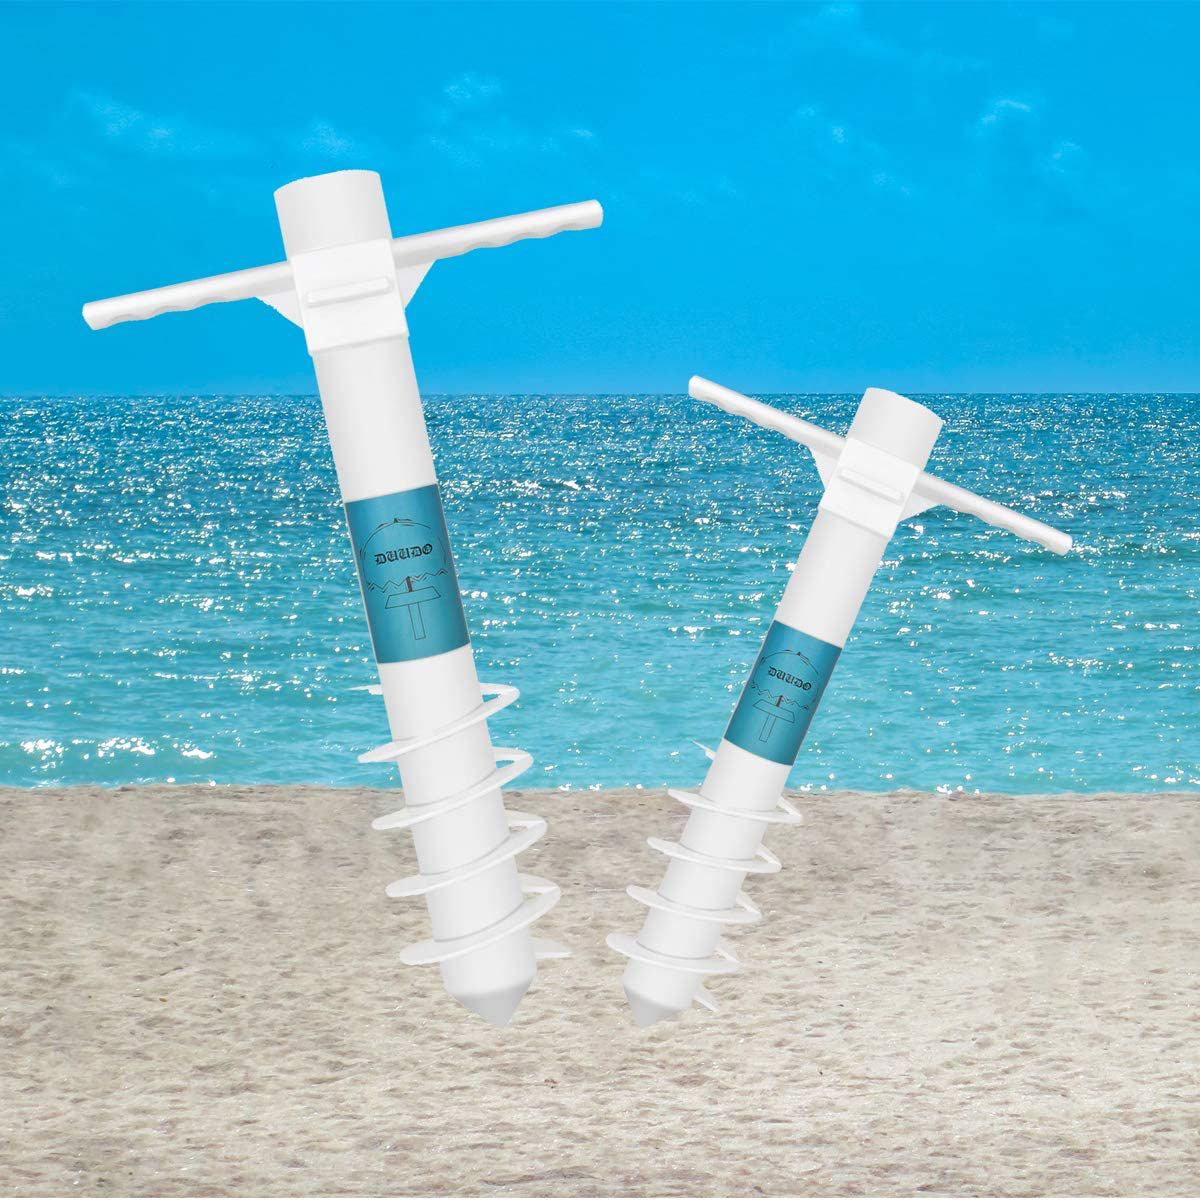 DUUDO Beach Umbrella Sand Anchor, with 5-Spiral Design One Size Fits All Umbrellas to Resist Strong Winds, White Umbrella Holder (1 Pack)